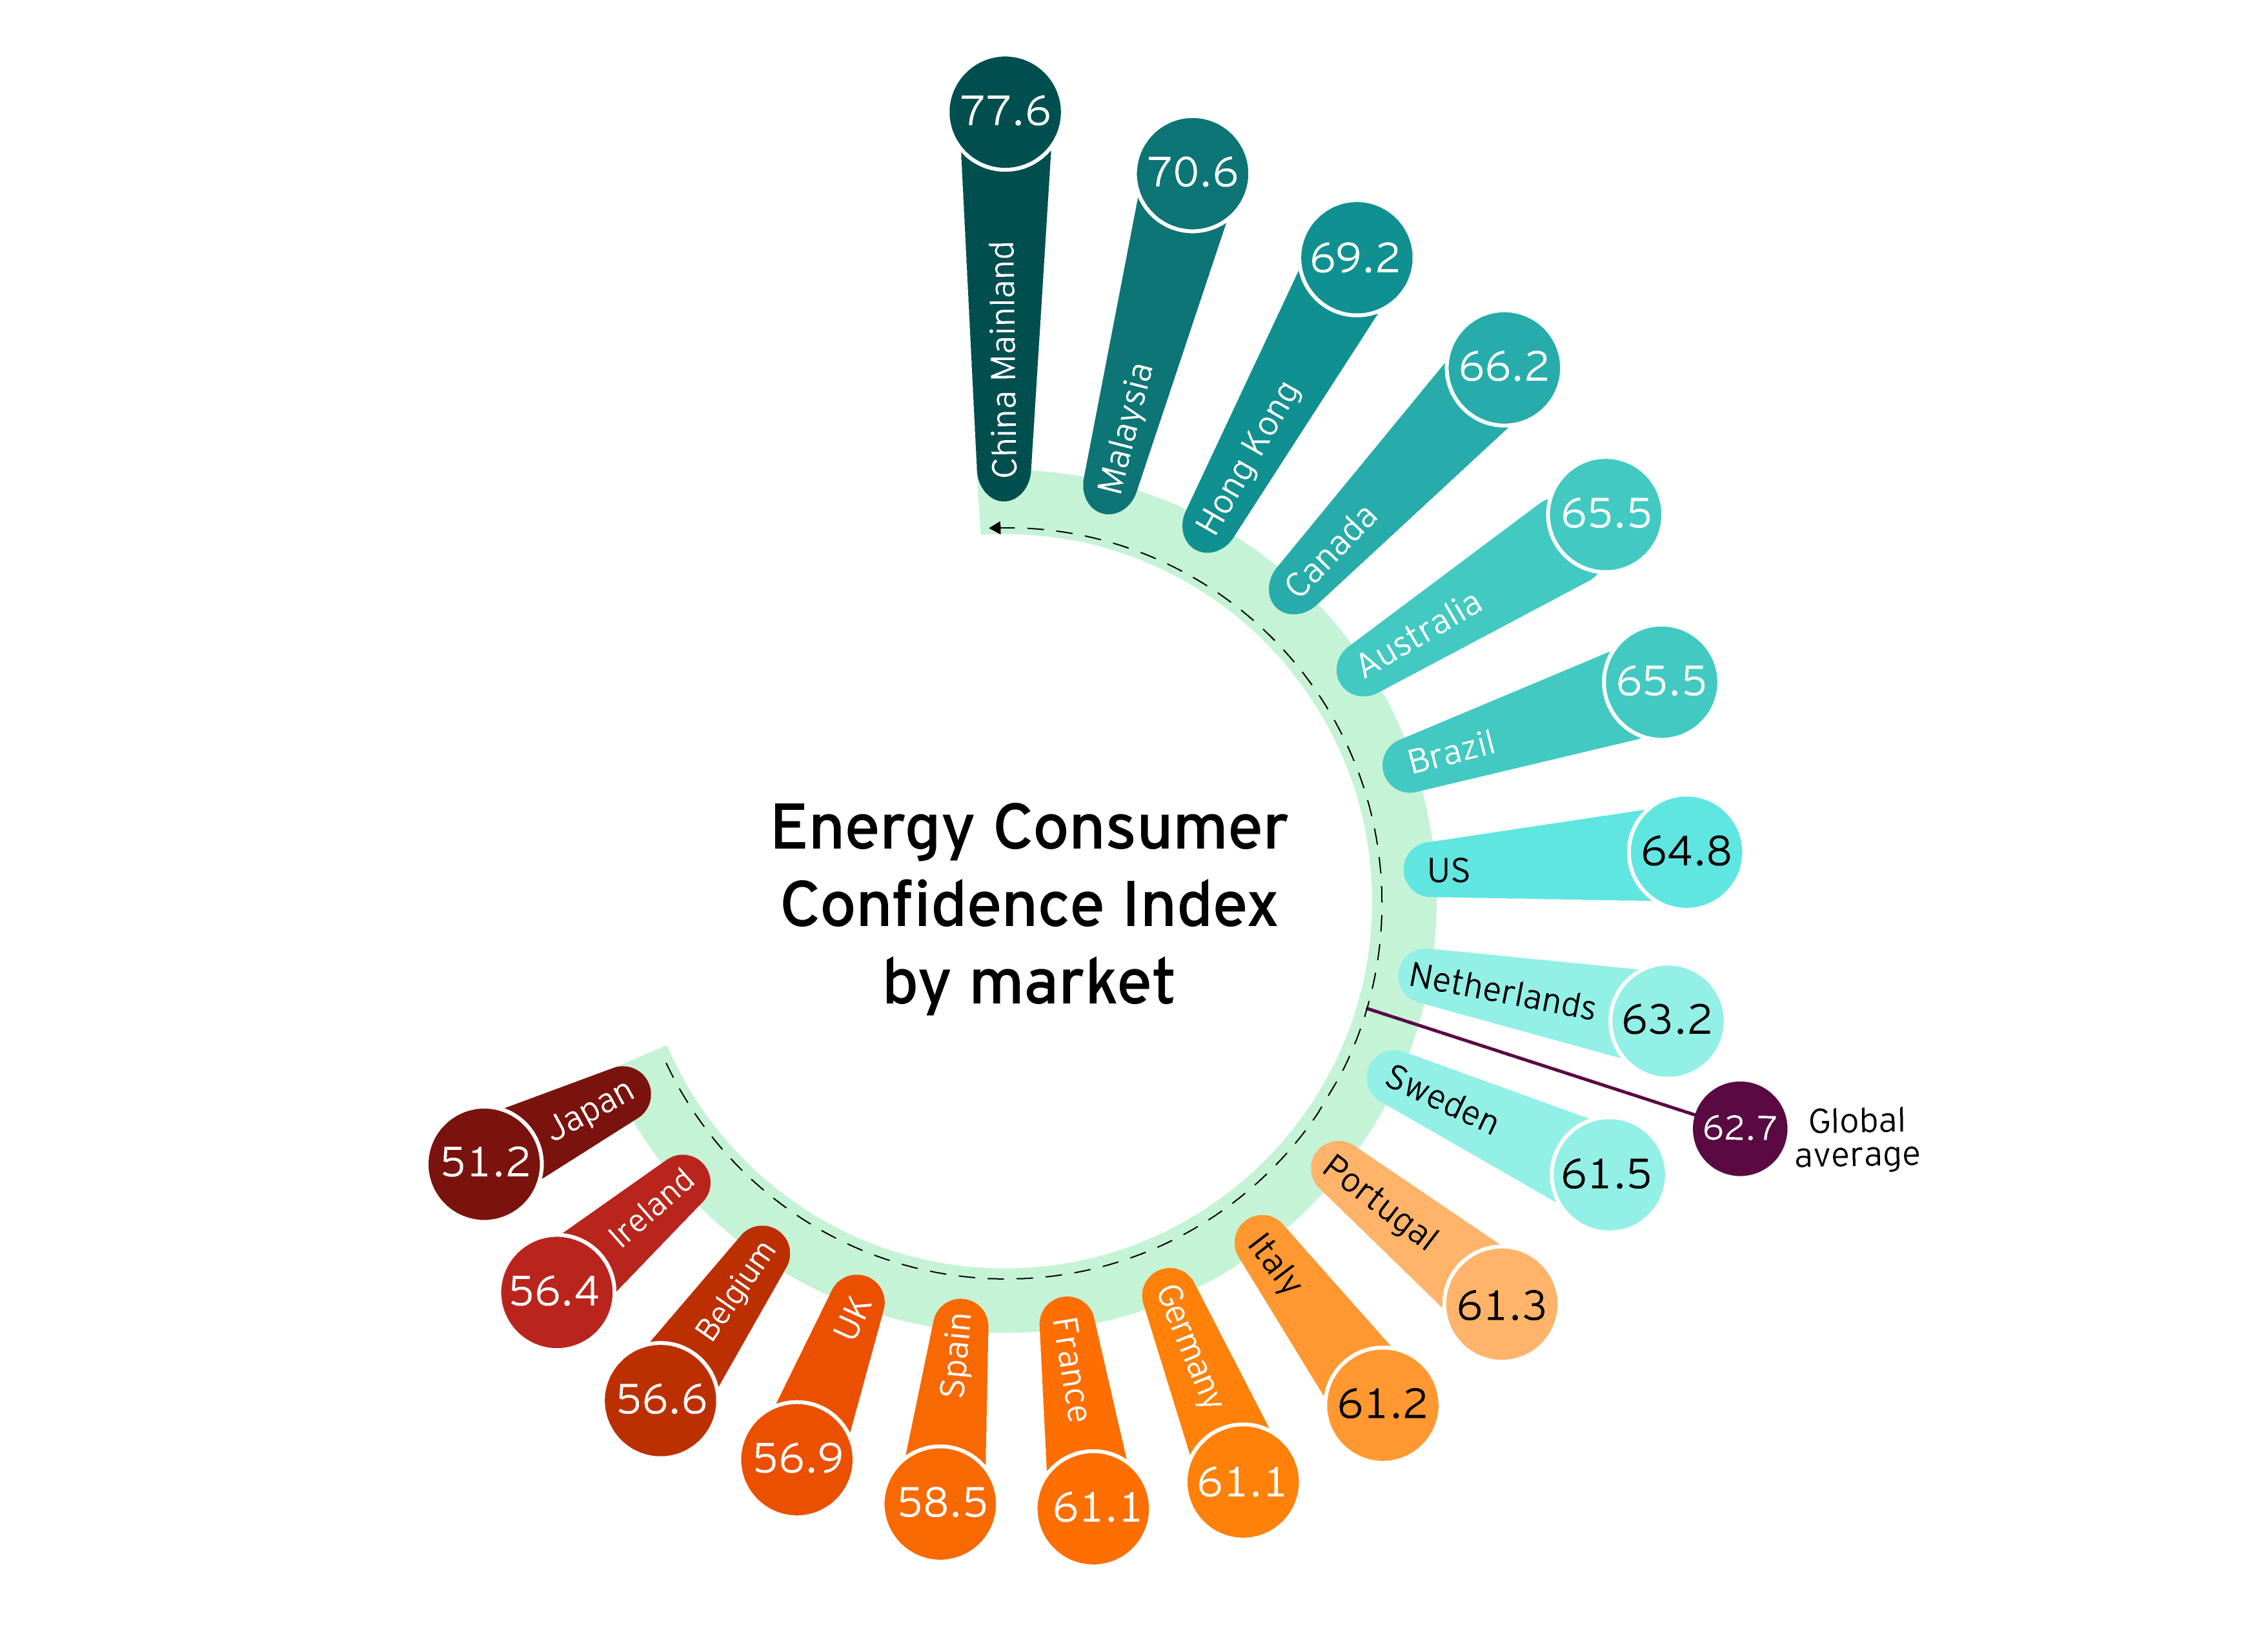 Energy consumer confidence index by market